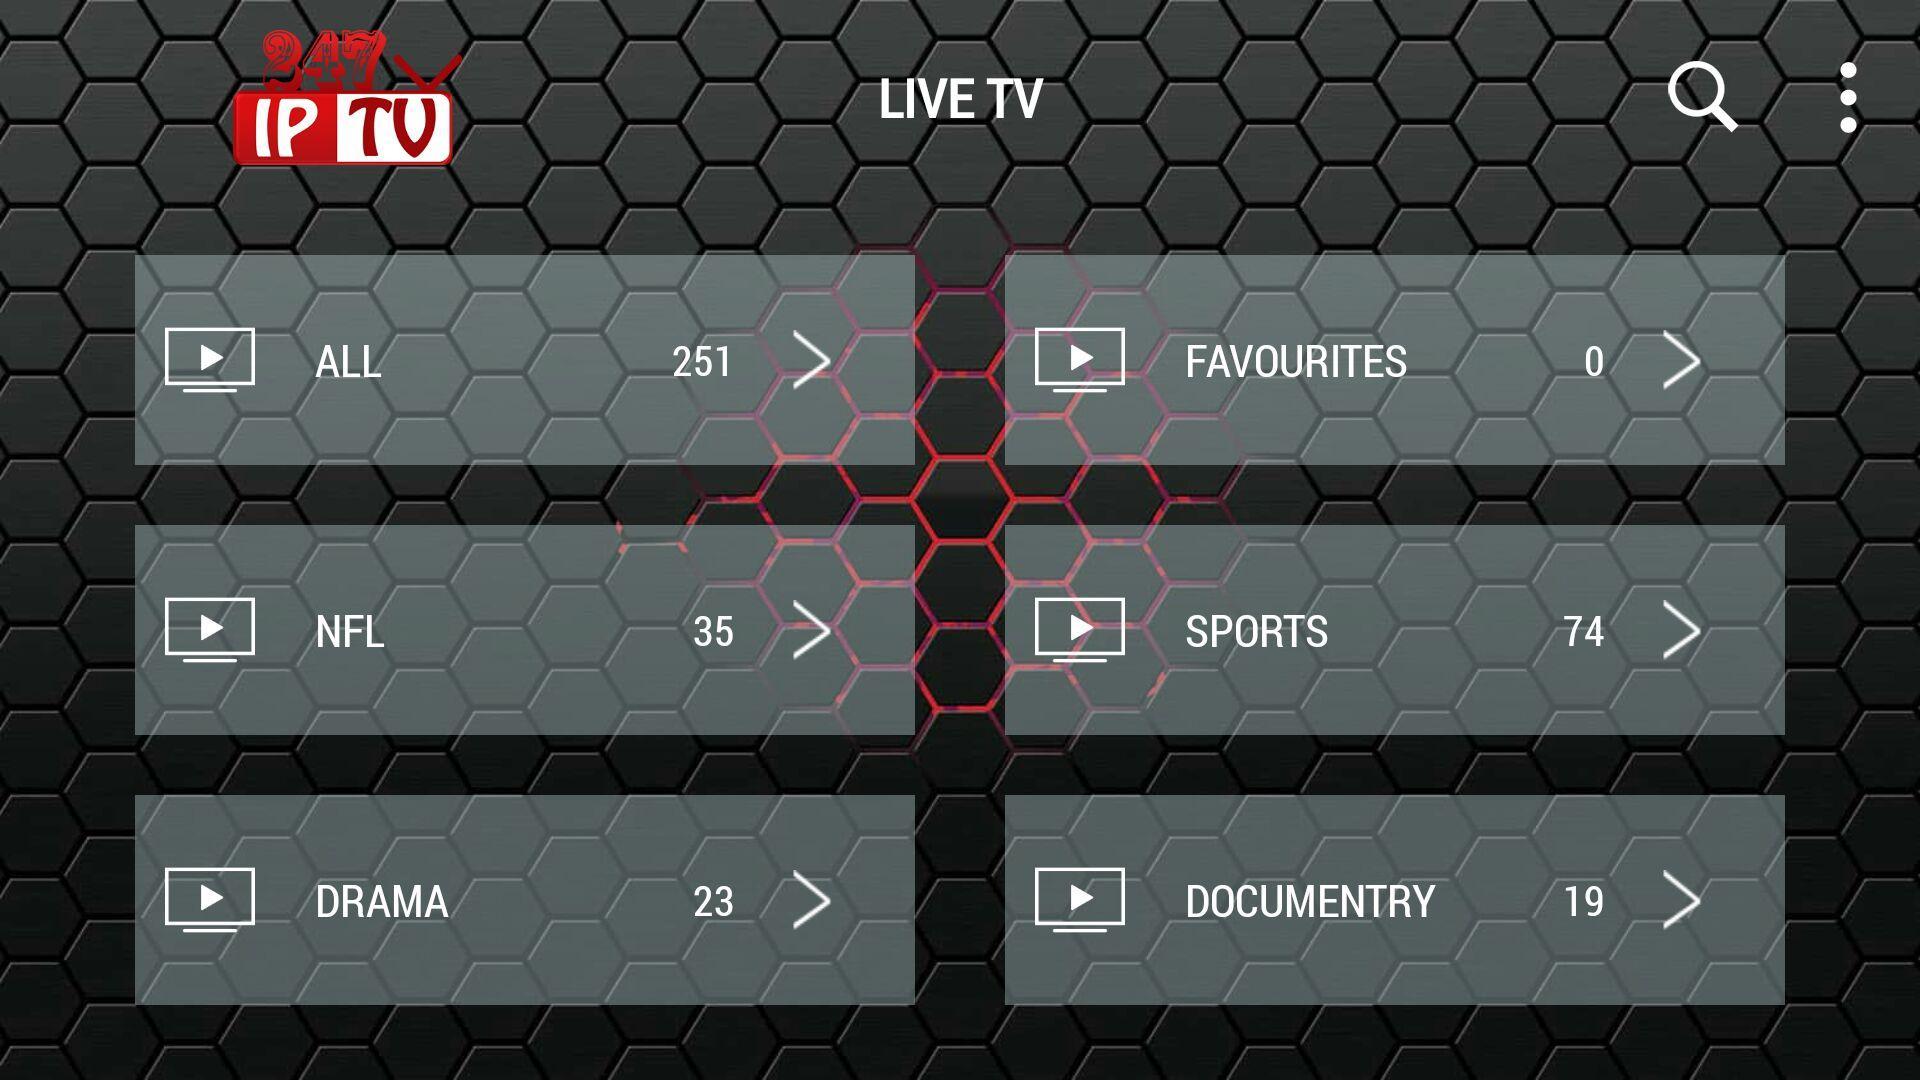 247 Ip Tv For Smart Tv For Android Apk Download